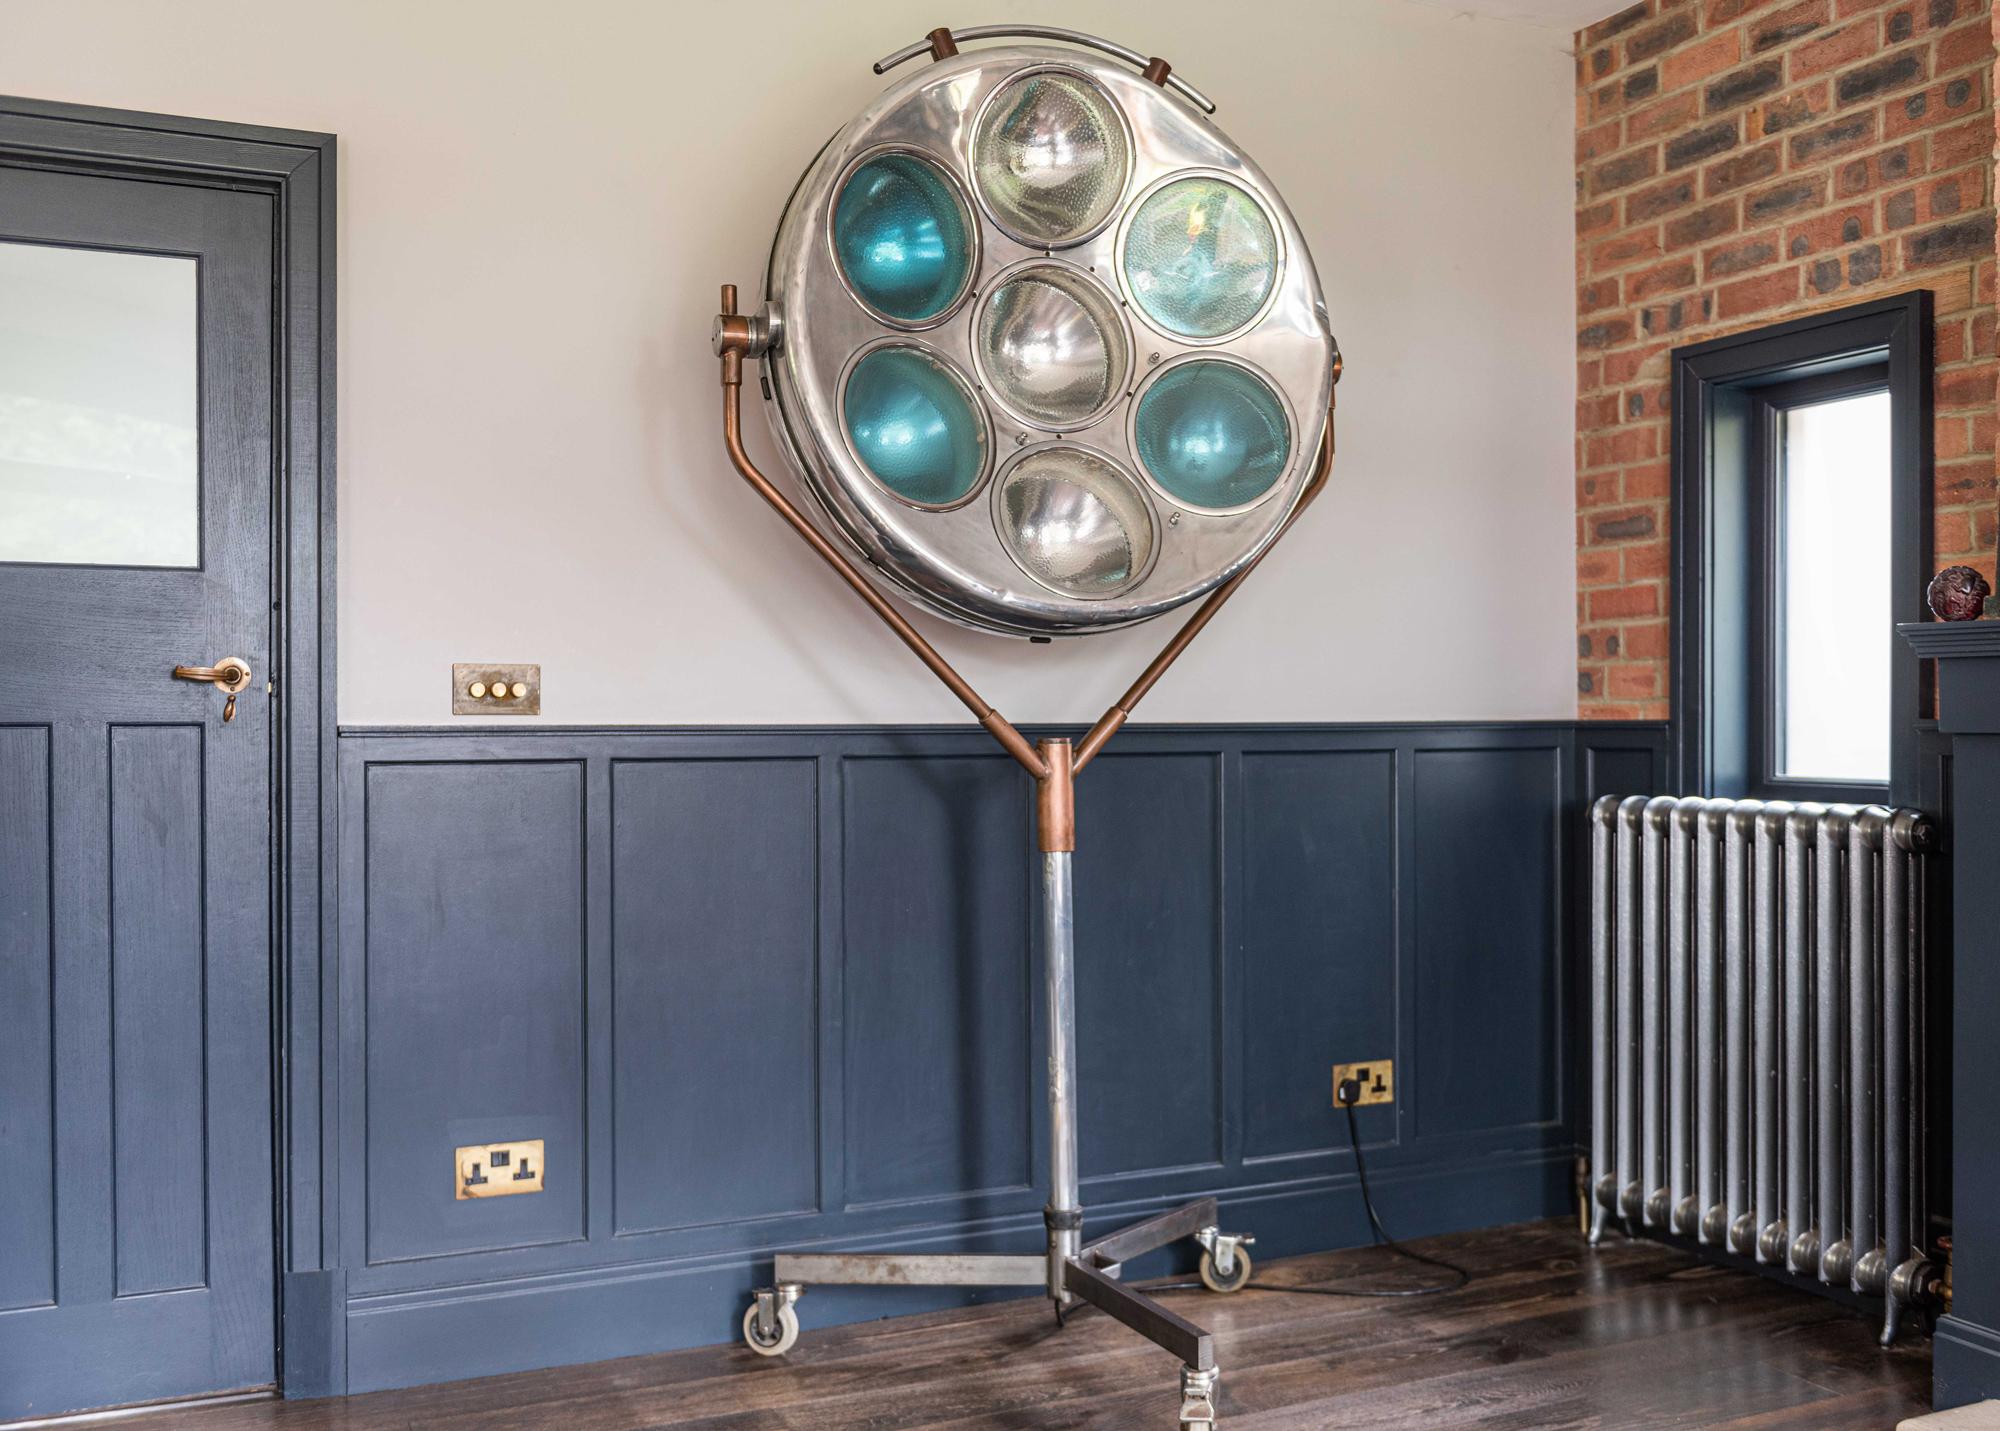 Midcentury industrial aluminium, surgeons operating theatre floor lamp, circa 1950

English makers name 'Unicol Oxford England', made from aluminium, bronze and steel.
The huge 100cm diameter adjustable lamp head tilts up and down and rotates 360